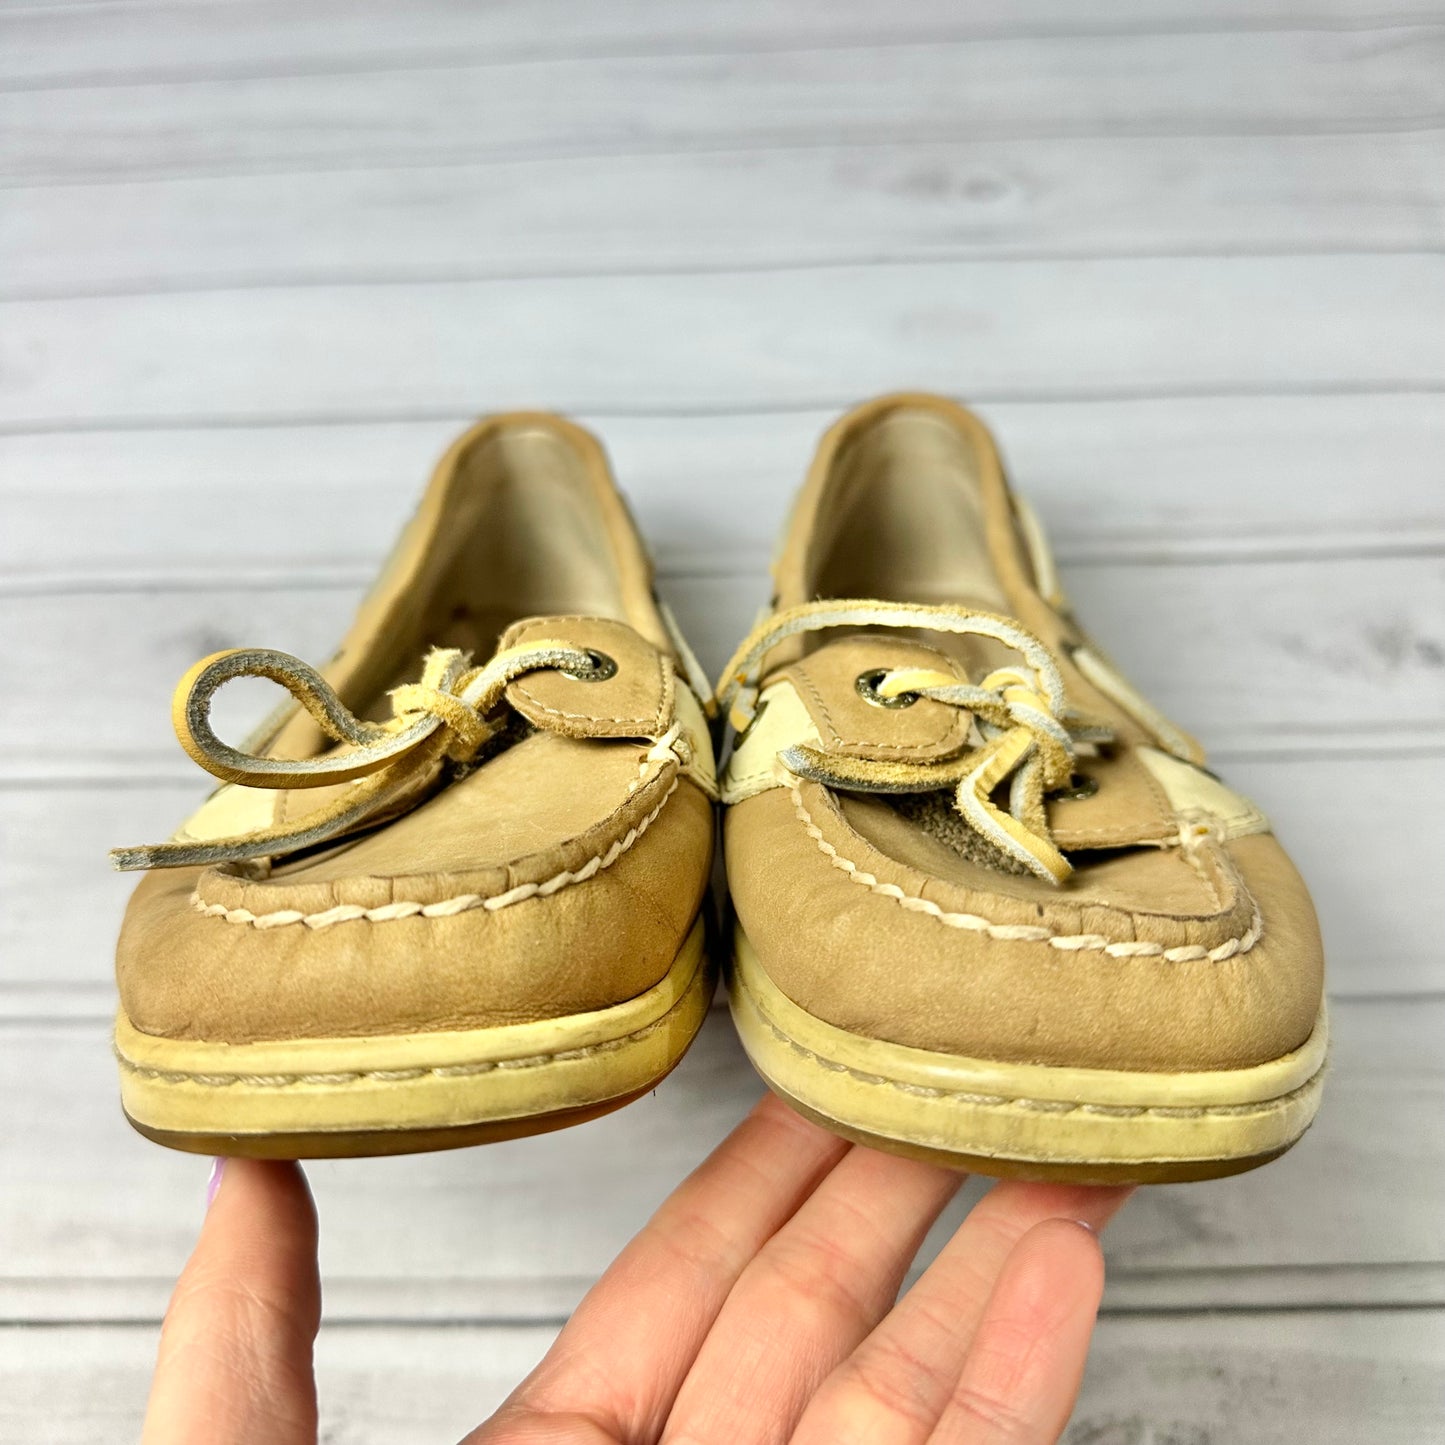 Shoes Flats Boat By Sperry  Size: 8.5